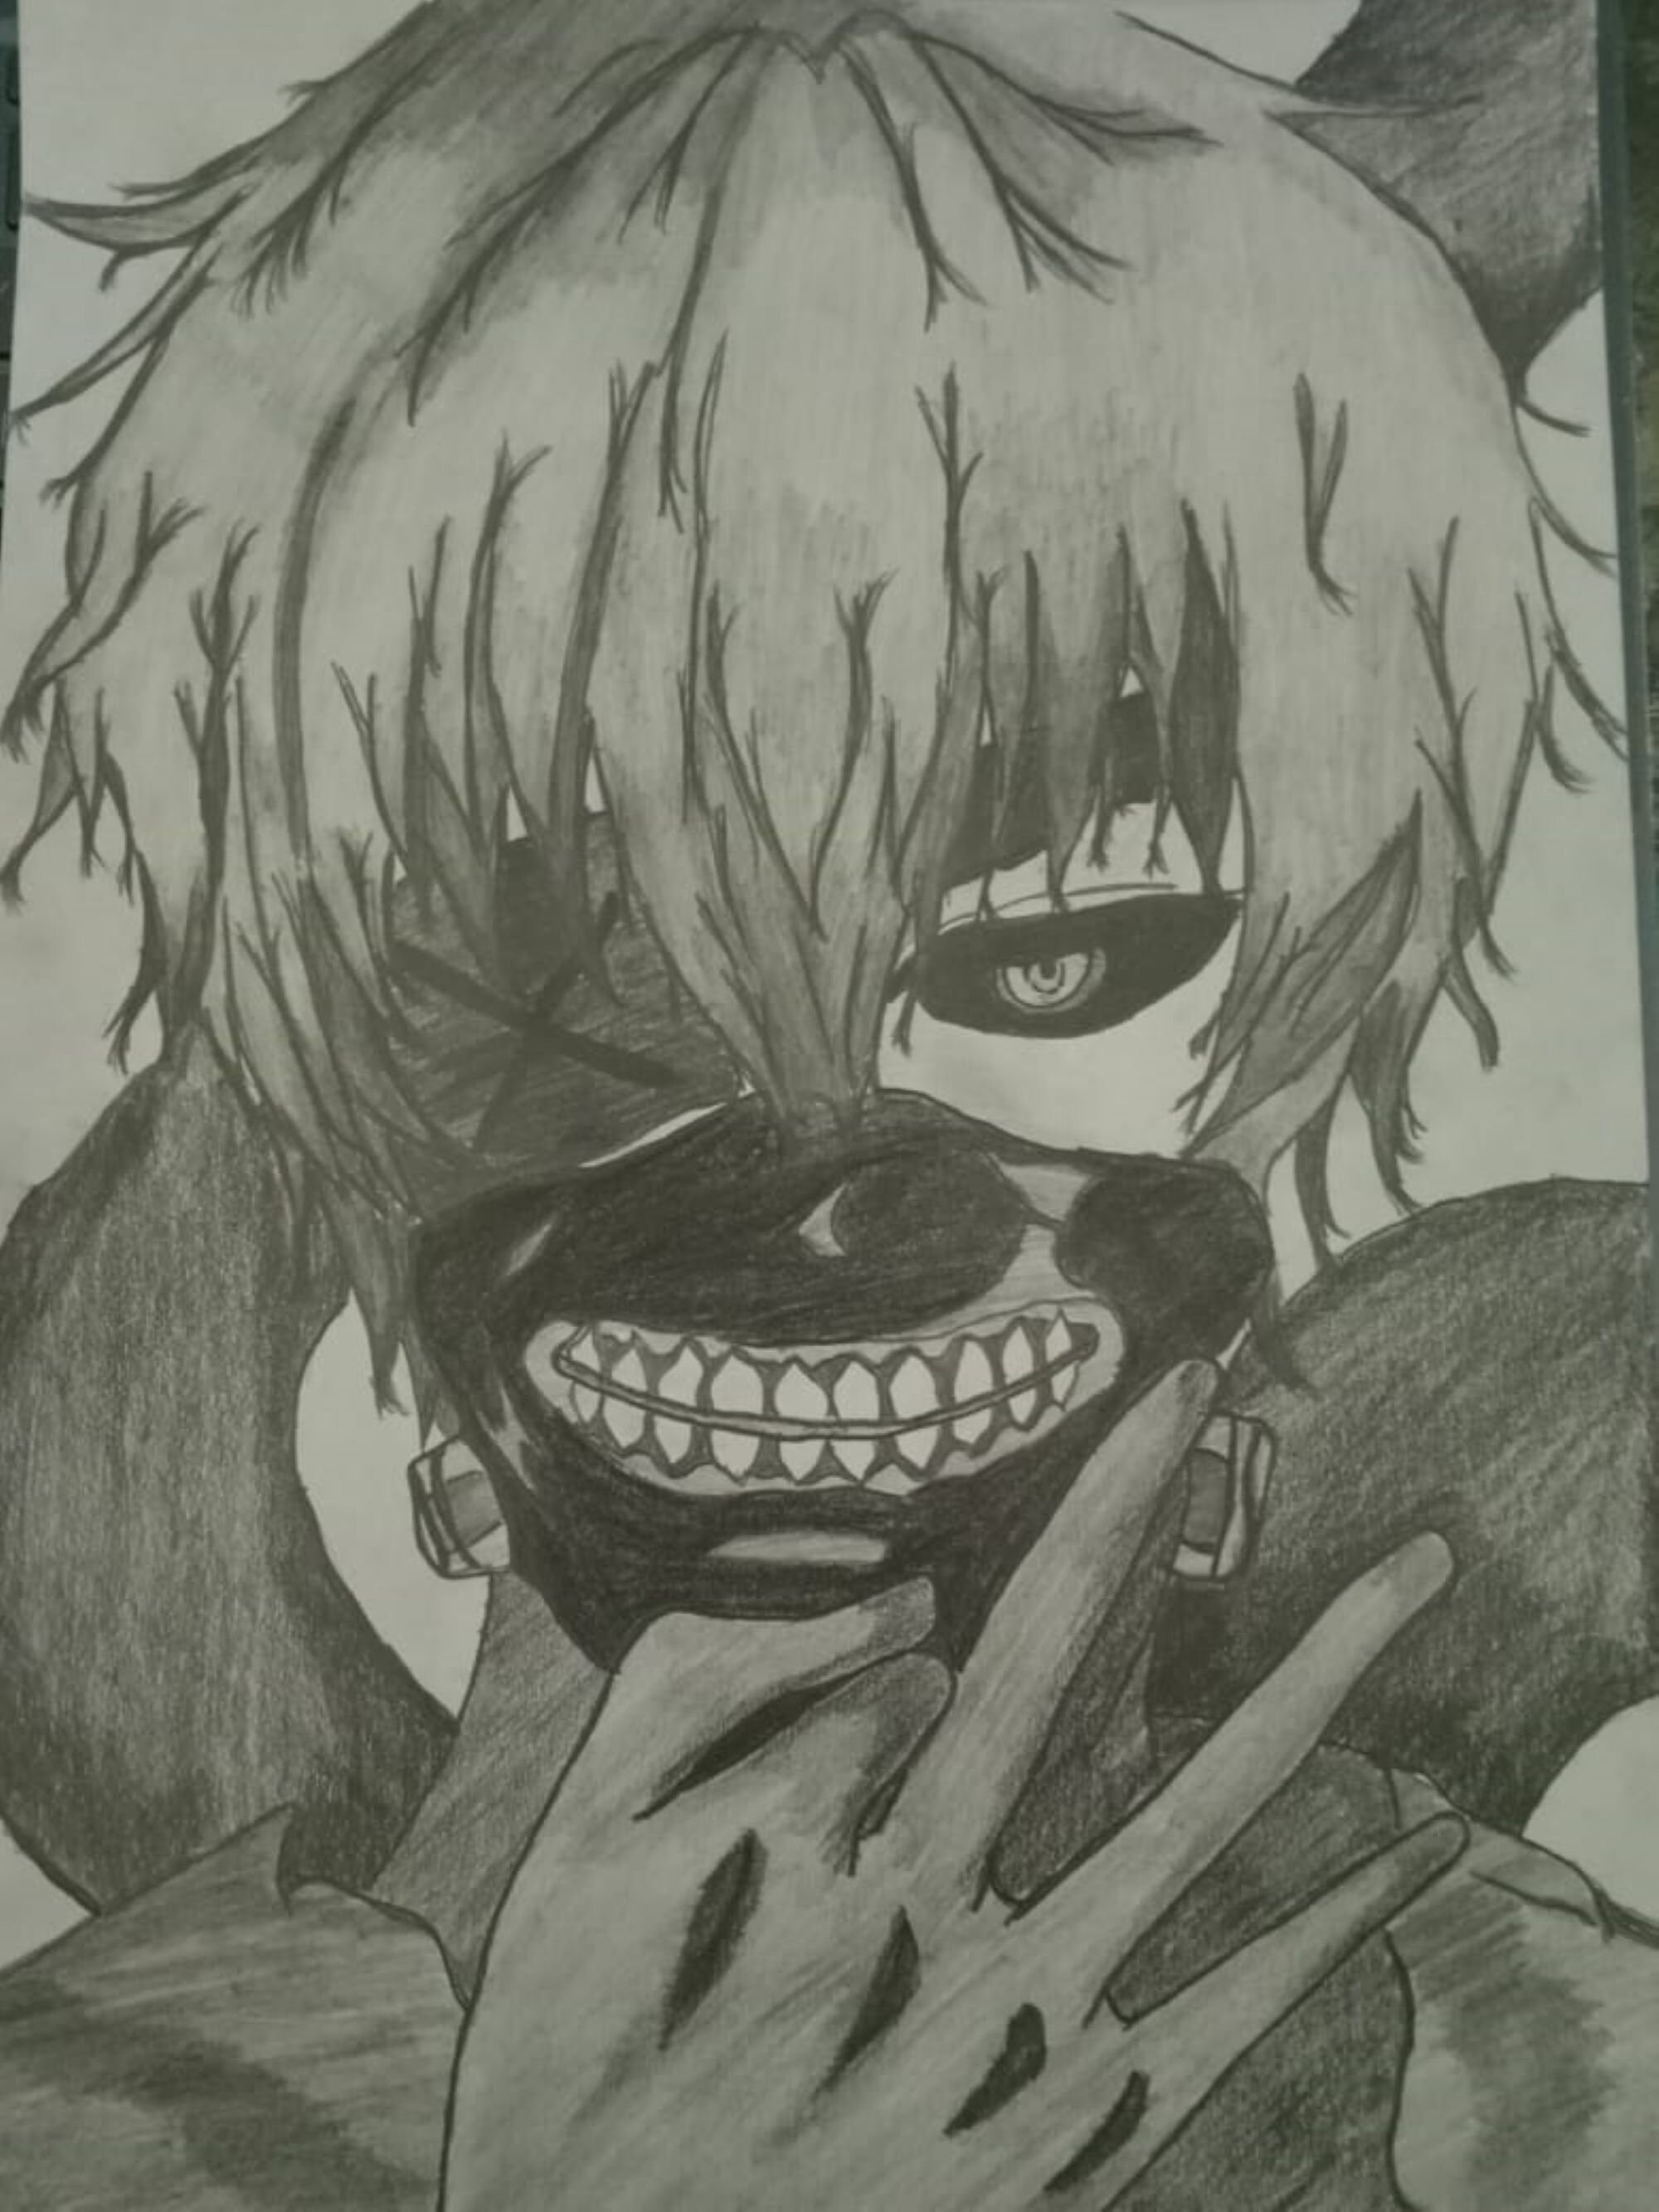 How to Draw KANEKI Ken [ Tokyo Ghoul ] - step by step - YouTube